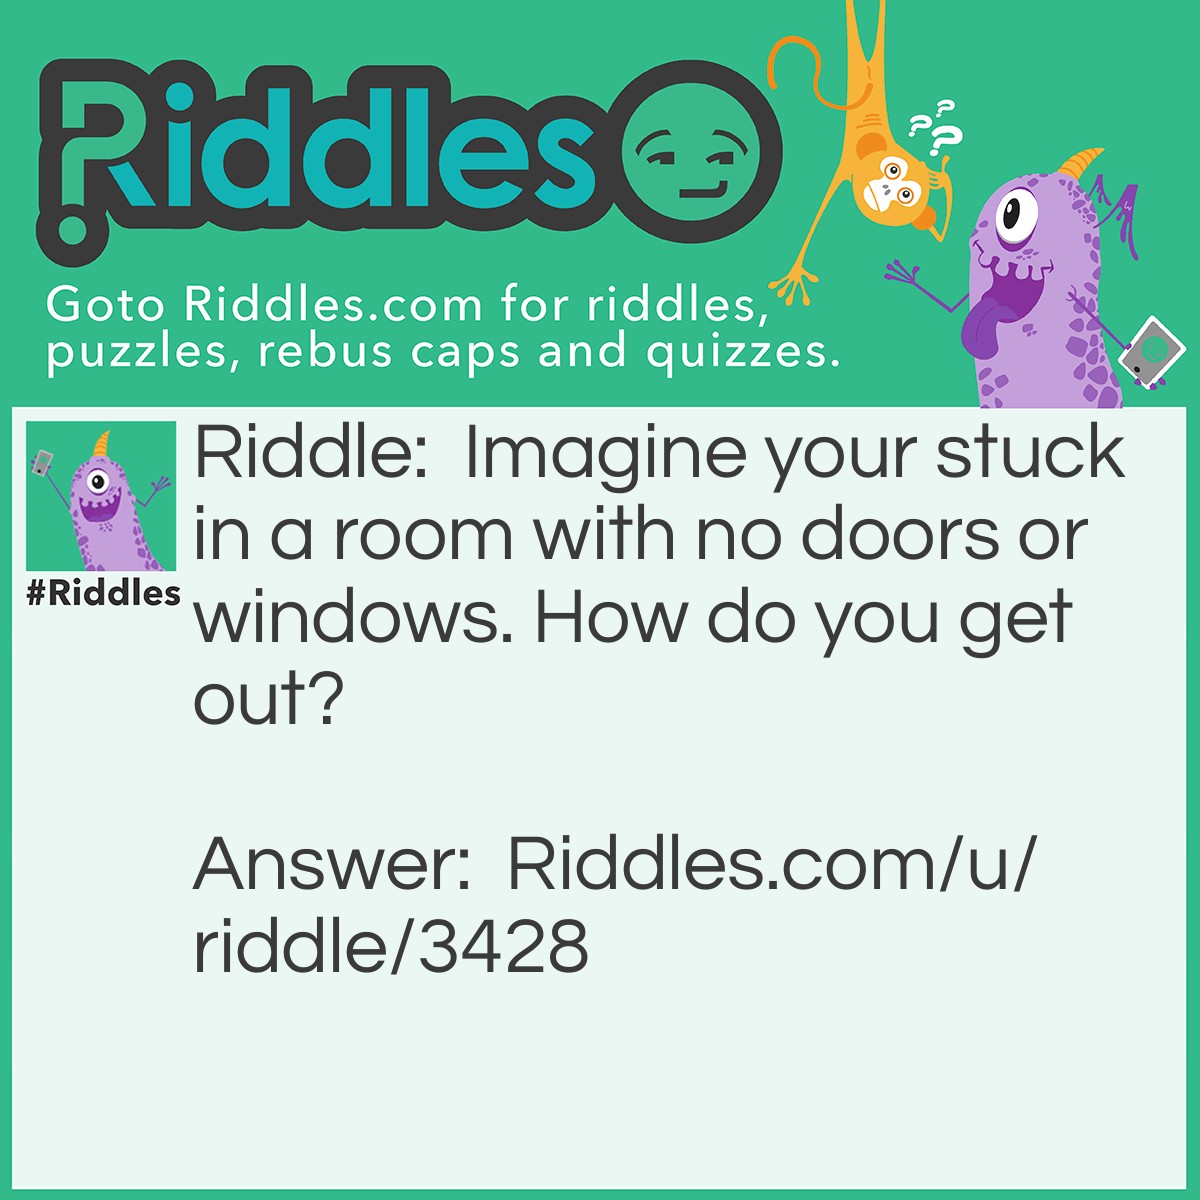 Riddle: Imagine your stuck in a room with no doors or windows. How do you get out? Answer: You stop imagining.